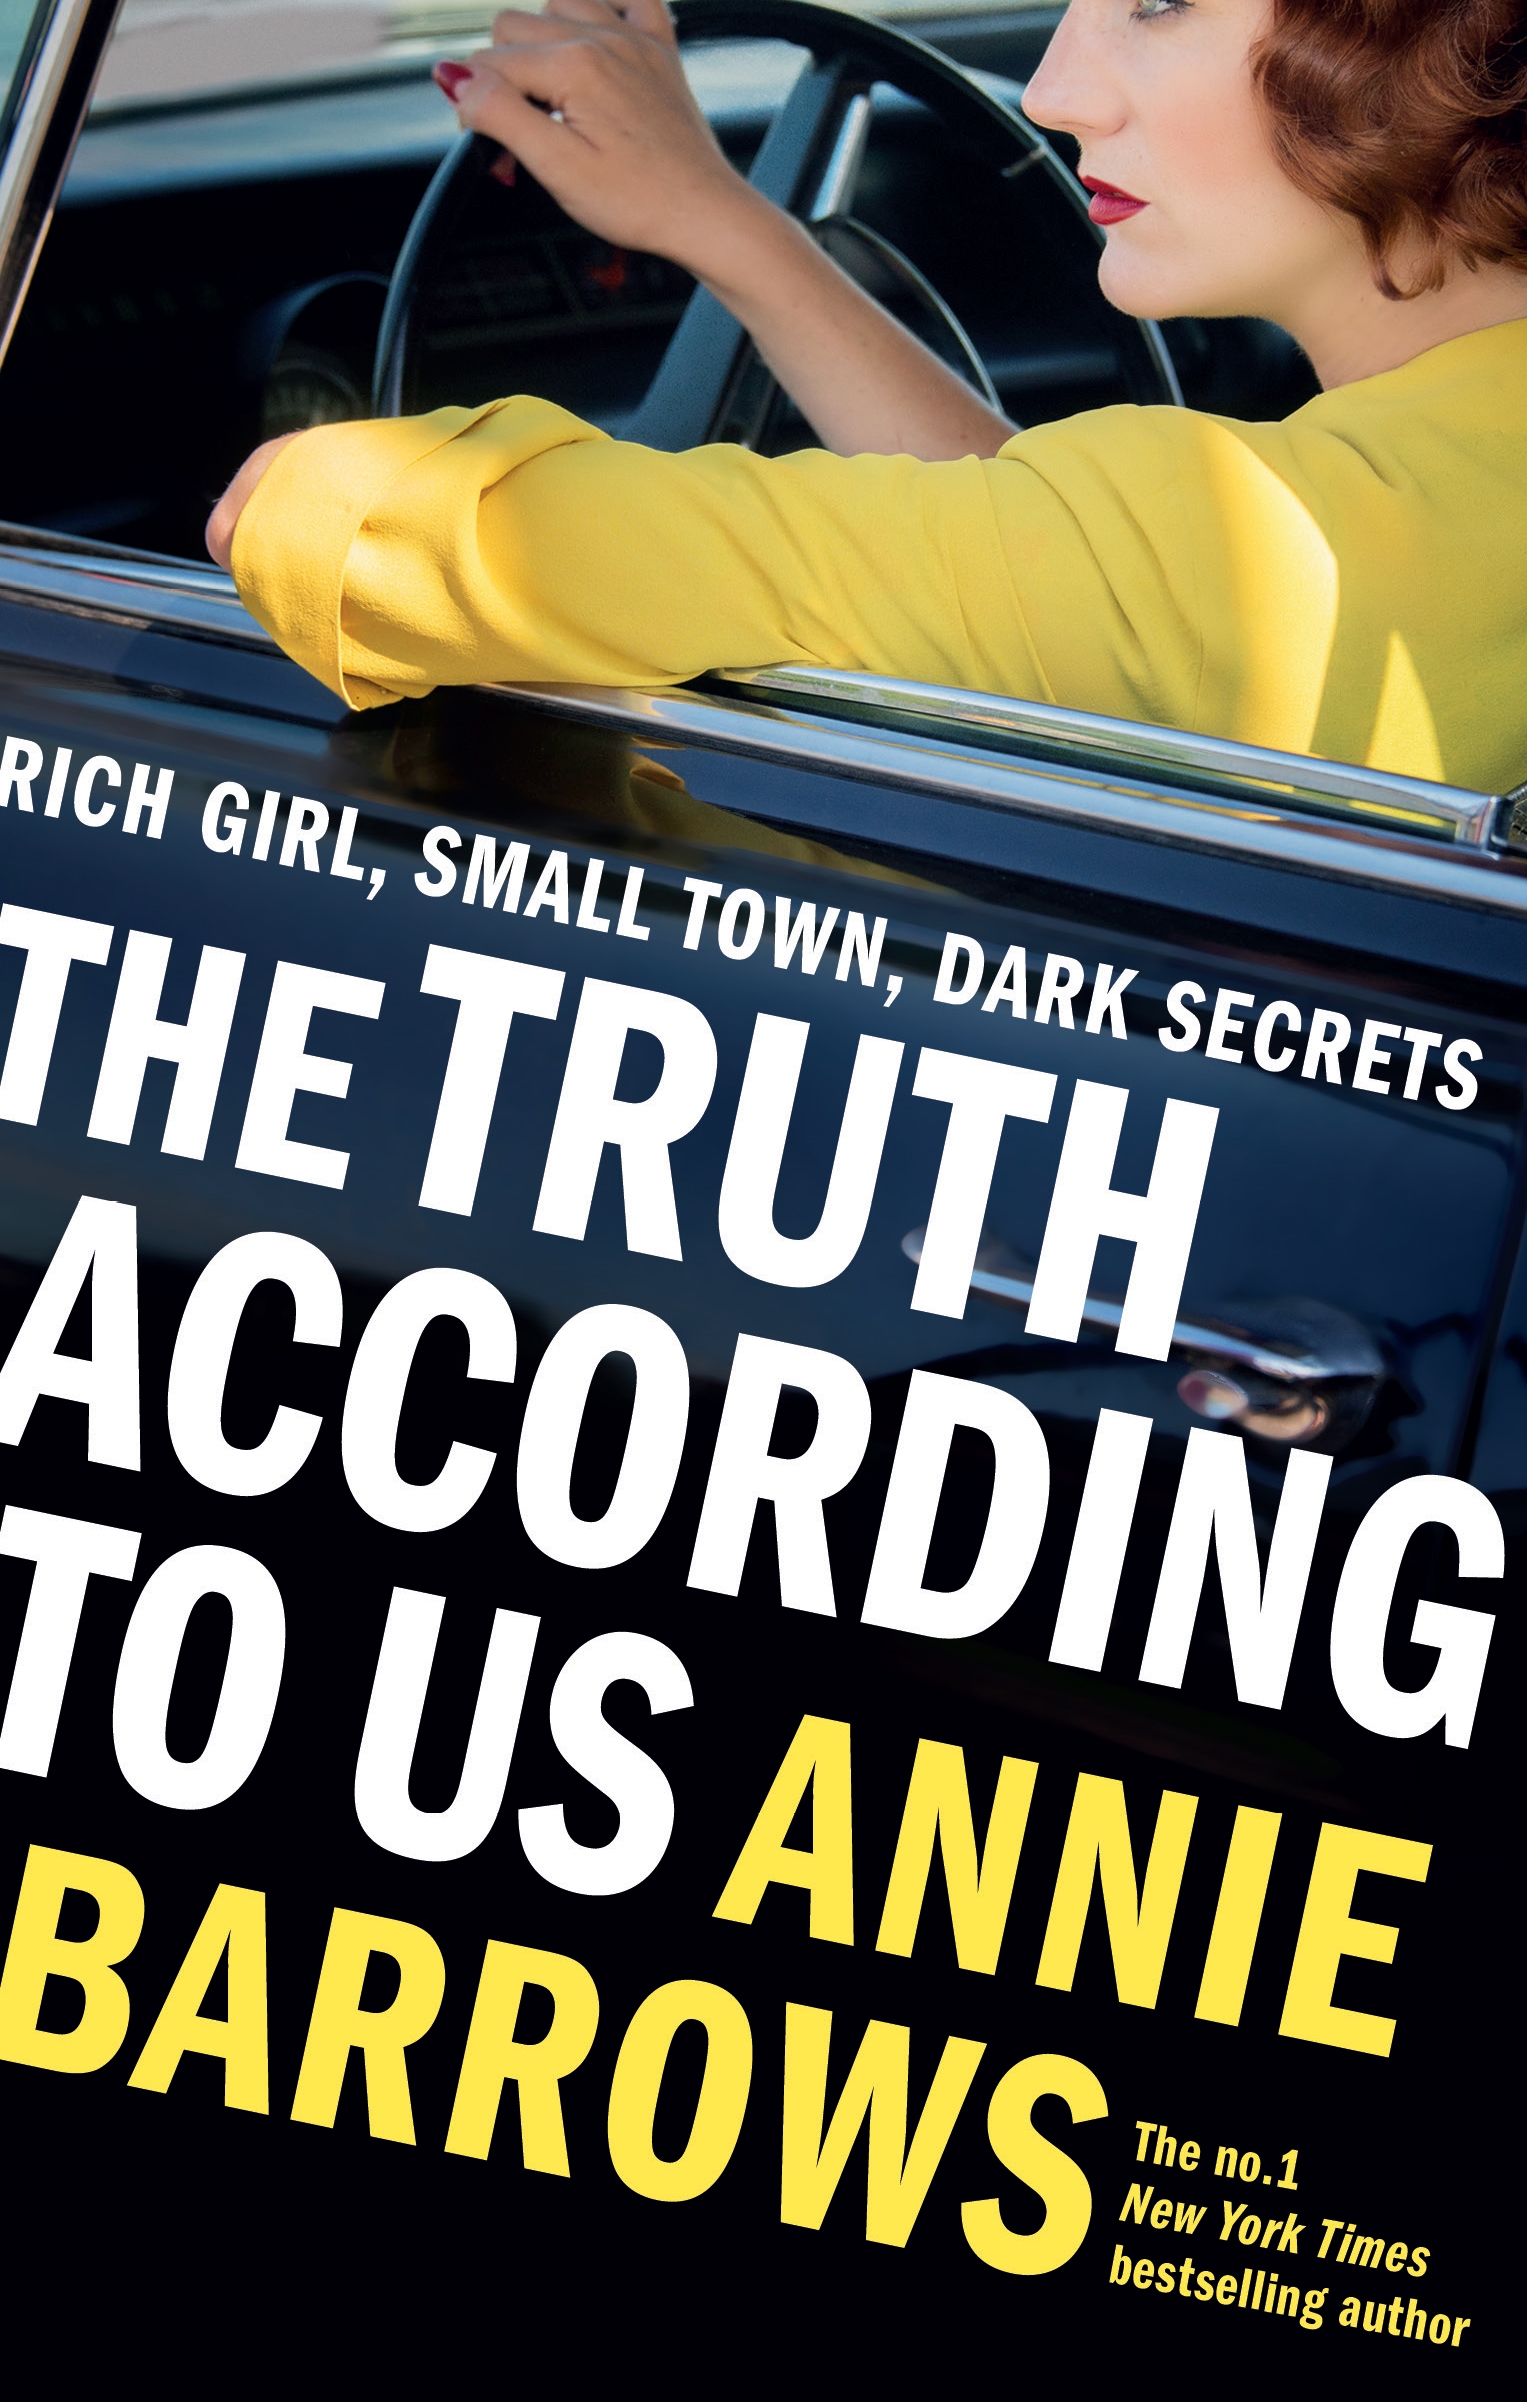 The Truth According to Us : Annie Barrows